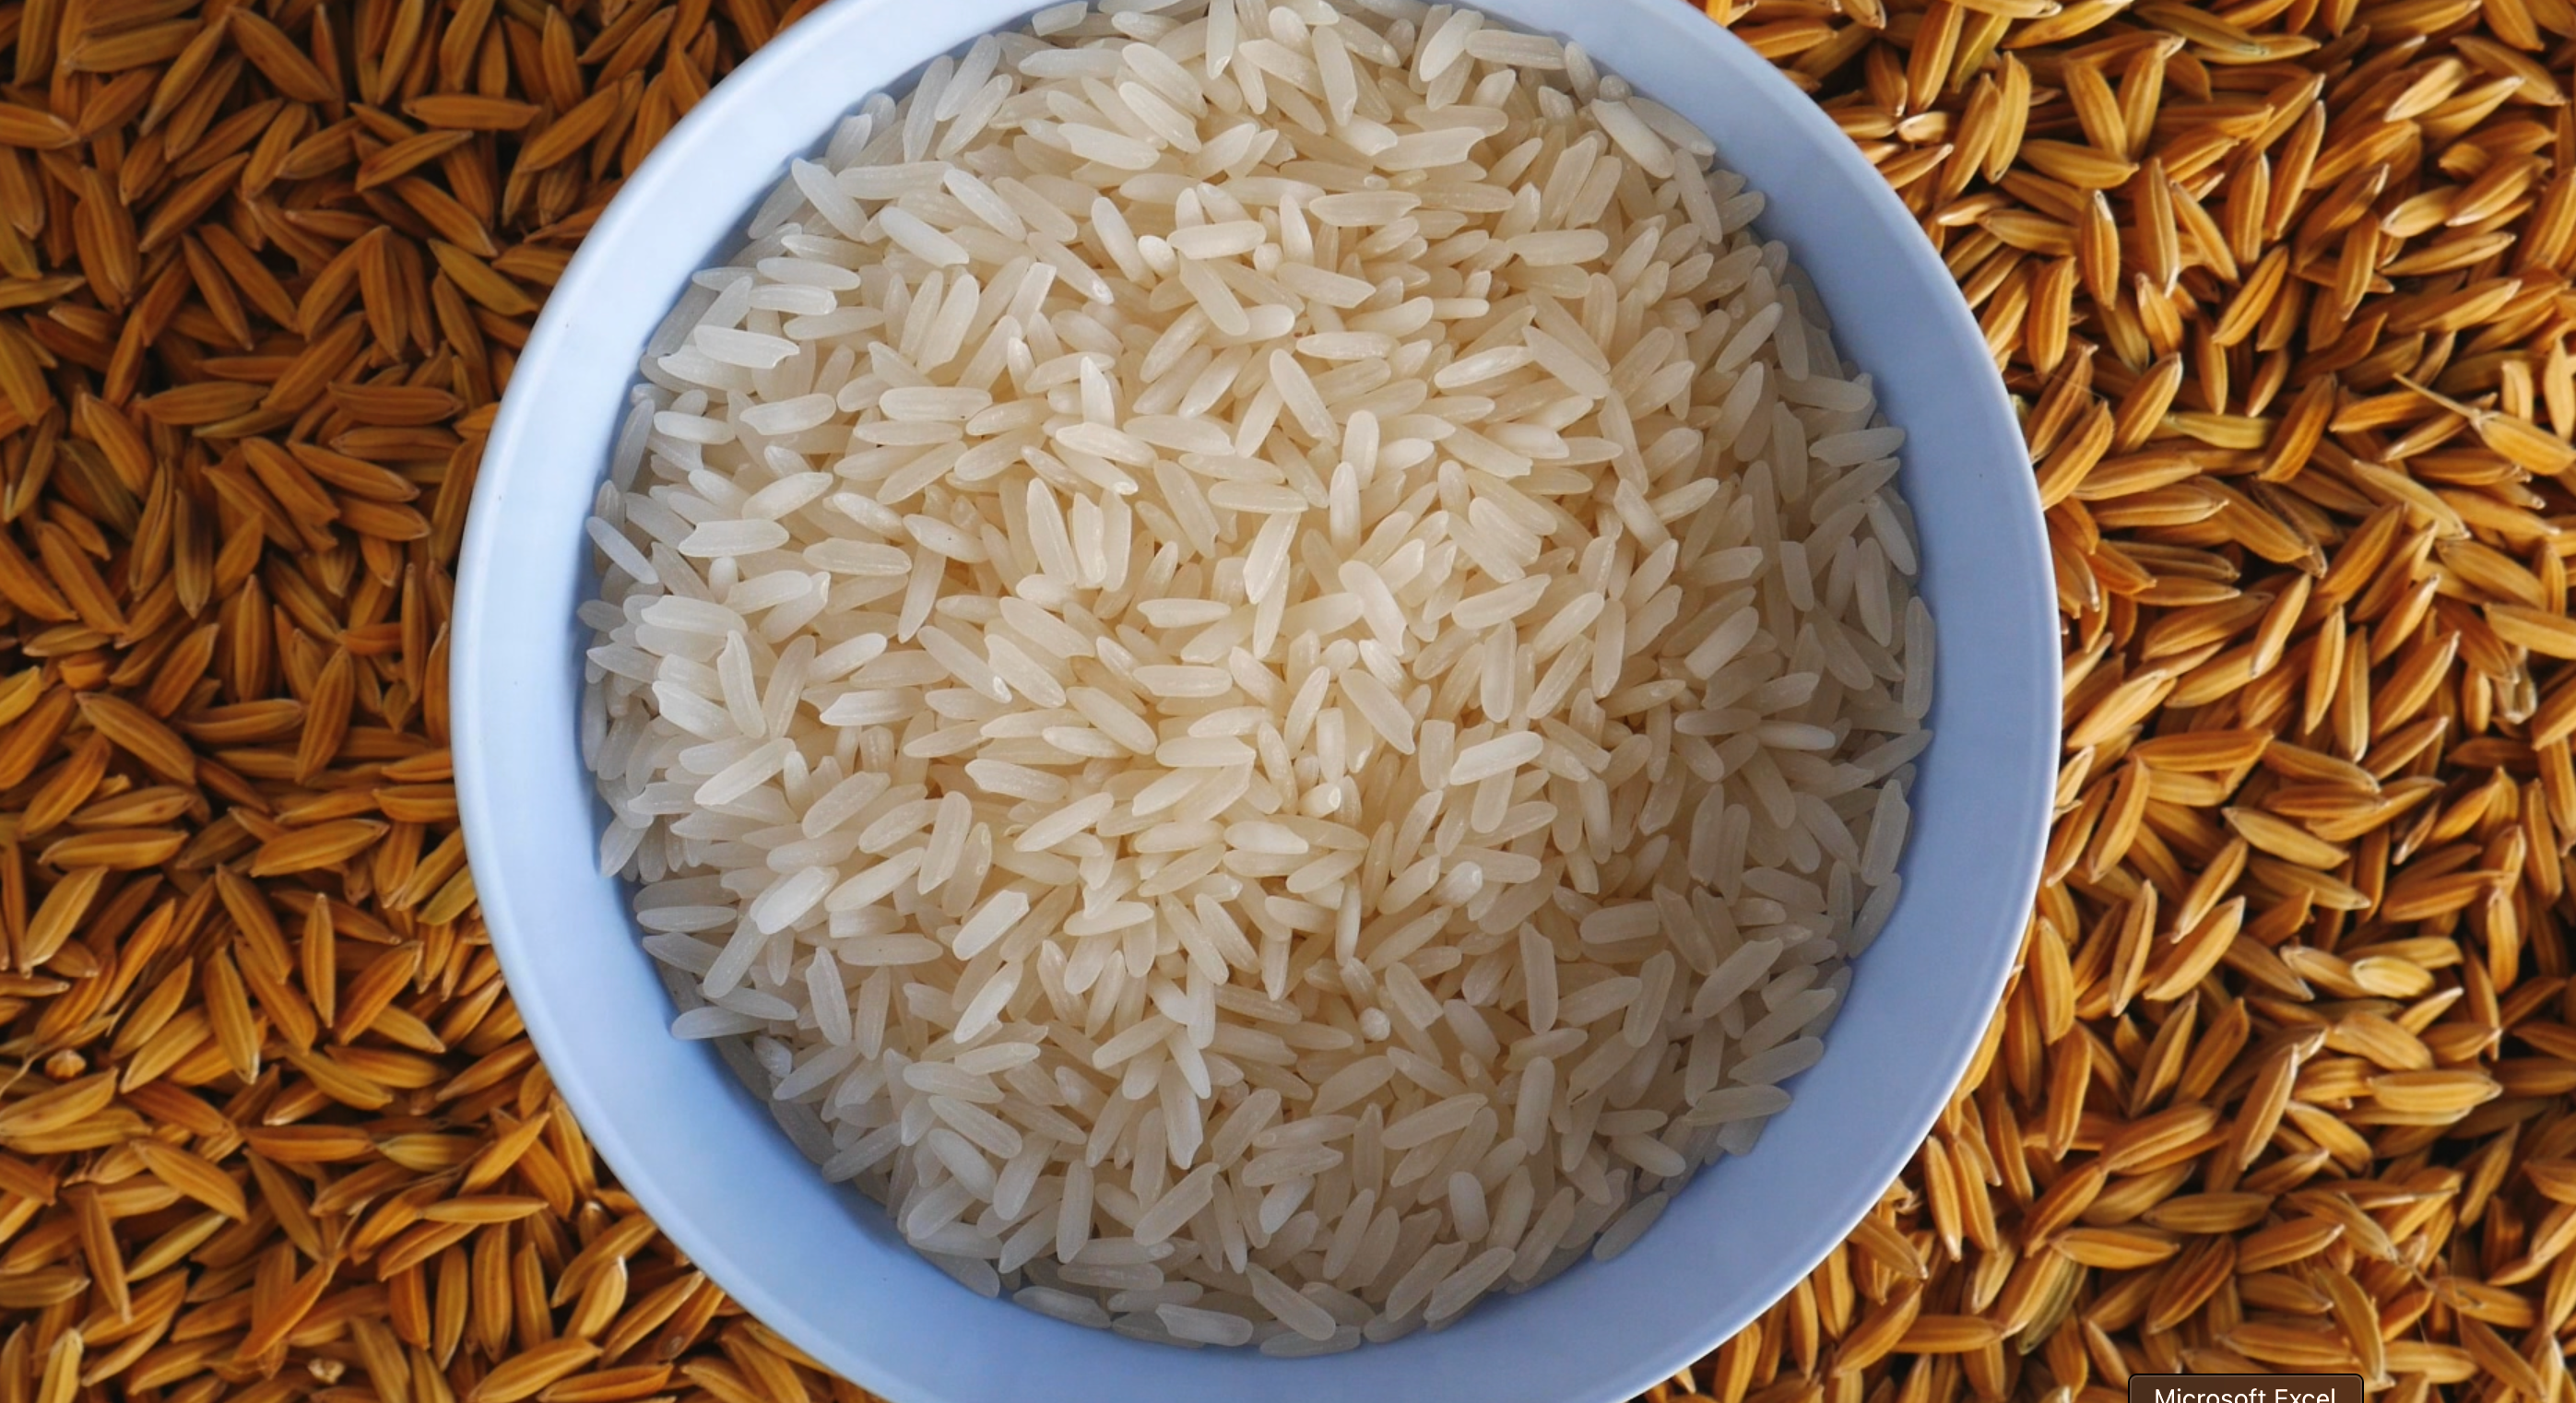 Brown or White Rice, which one is better?